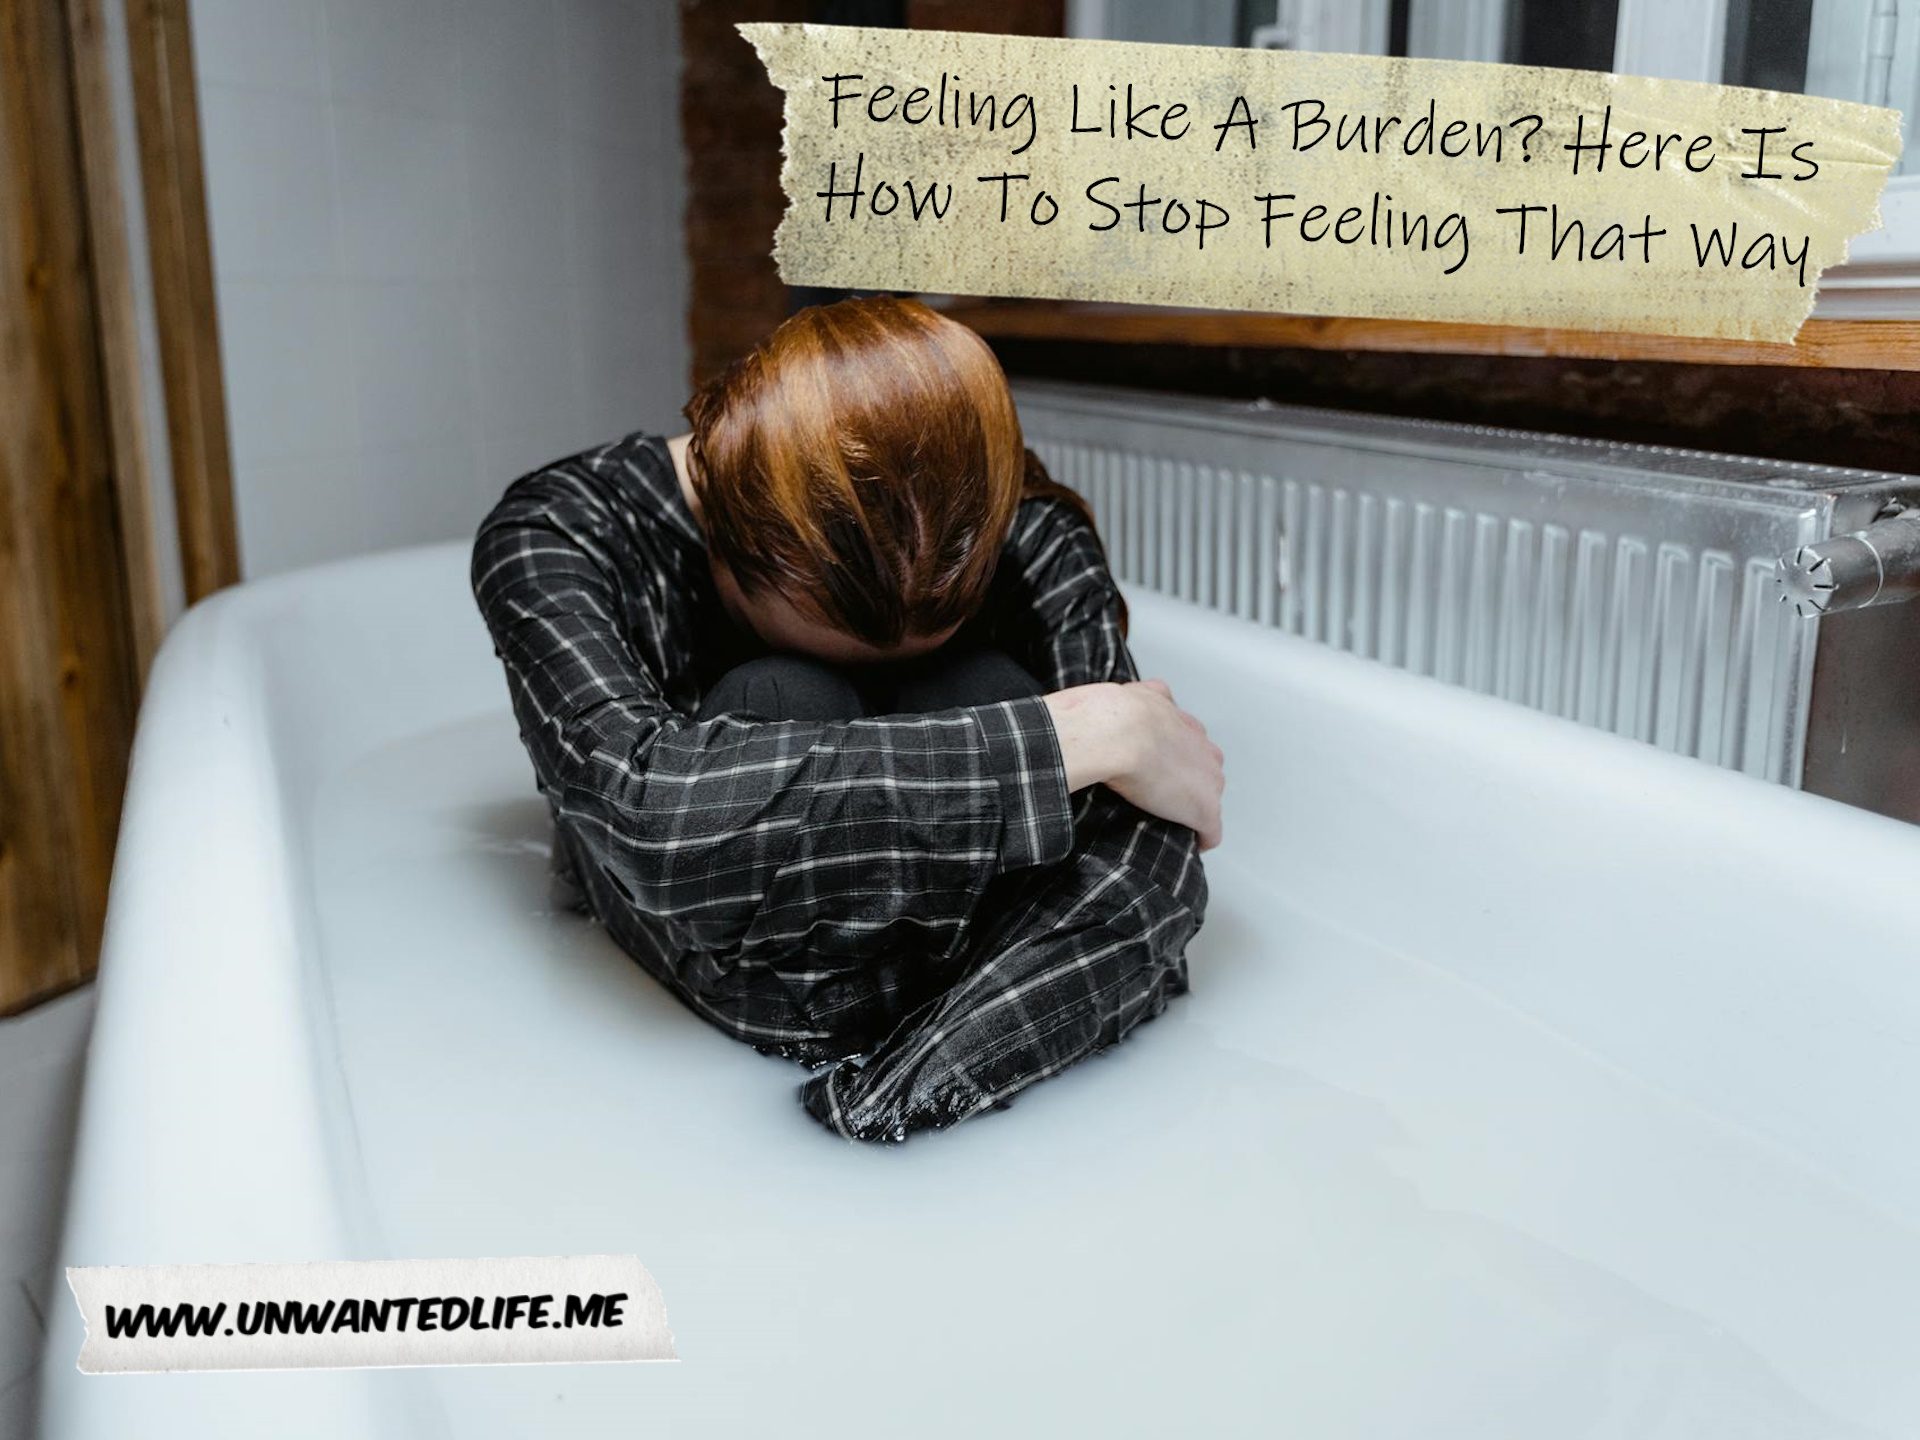 A woman wearing PJs sitting curled up in a bathtub full of water to represent the topic of the article - Feeling Like A Burden? Here Is How To Stop Feeling That Way